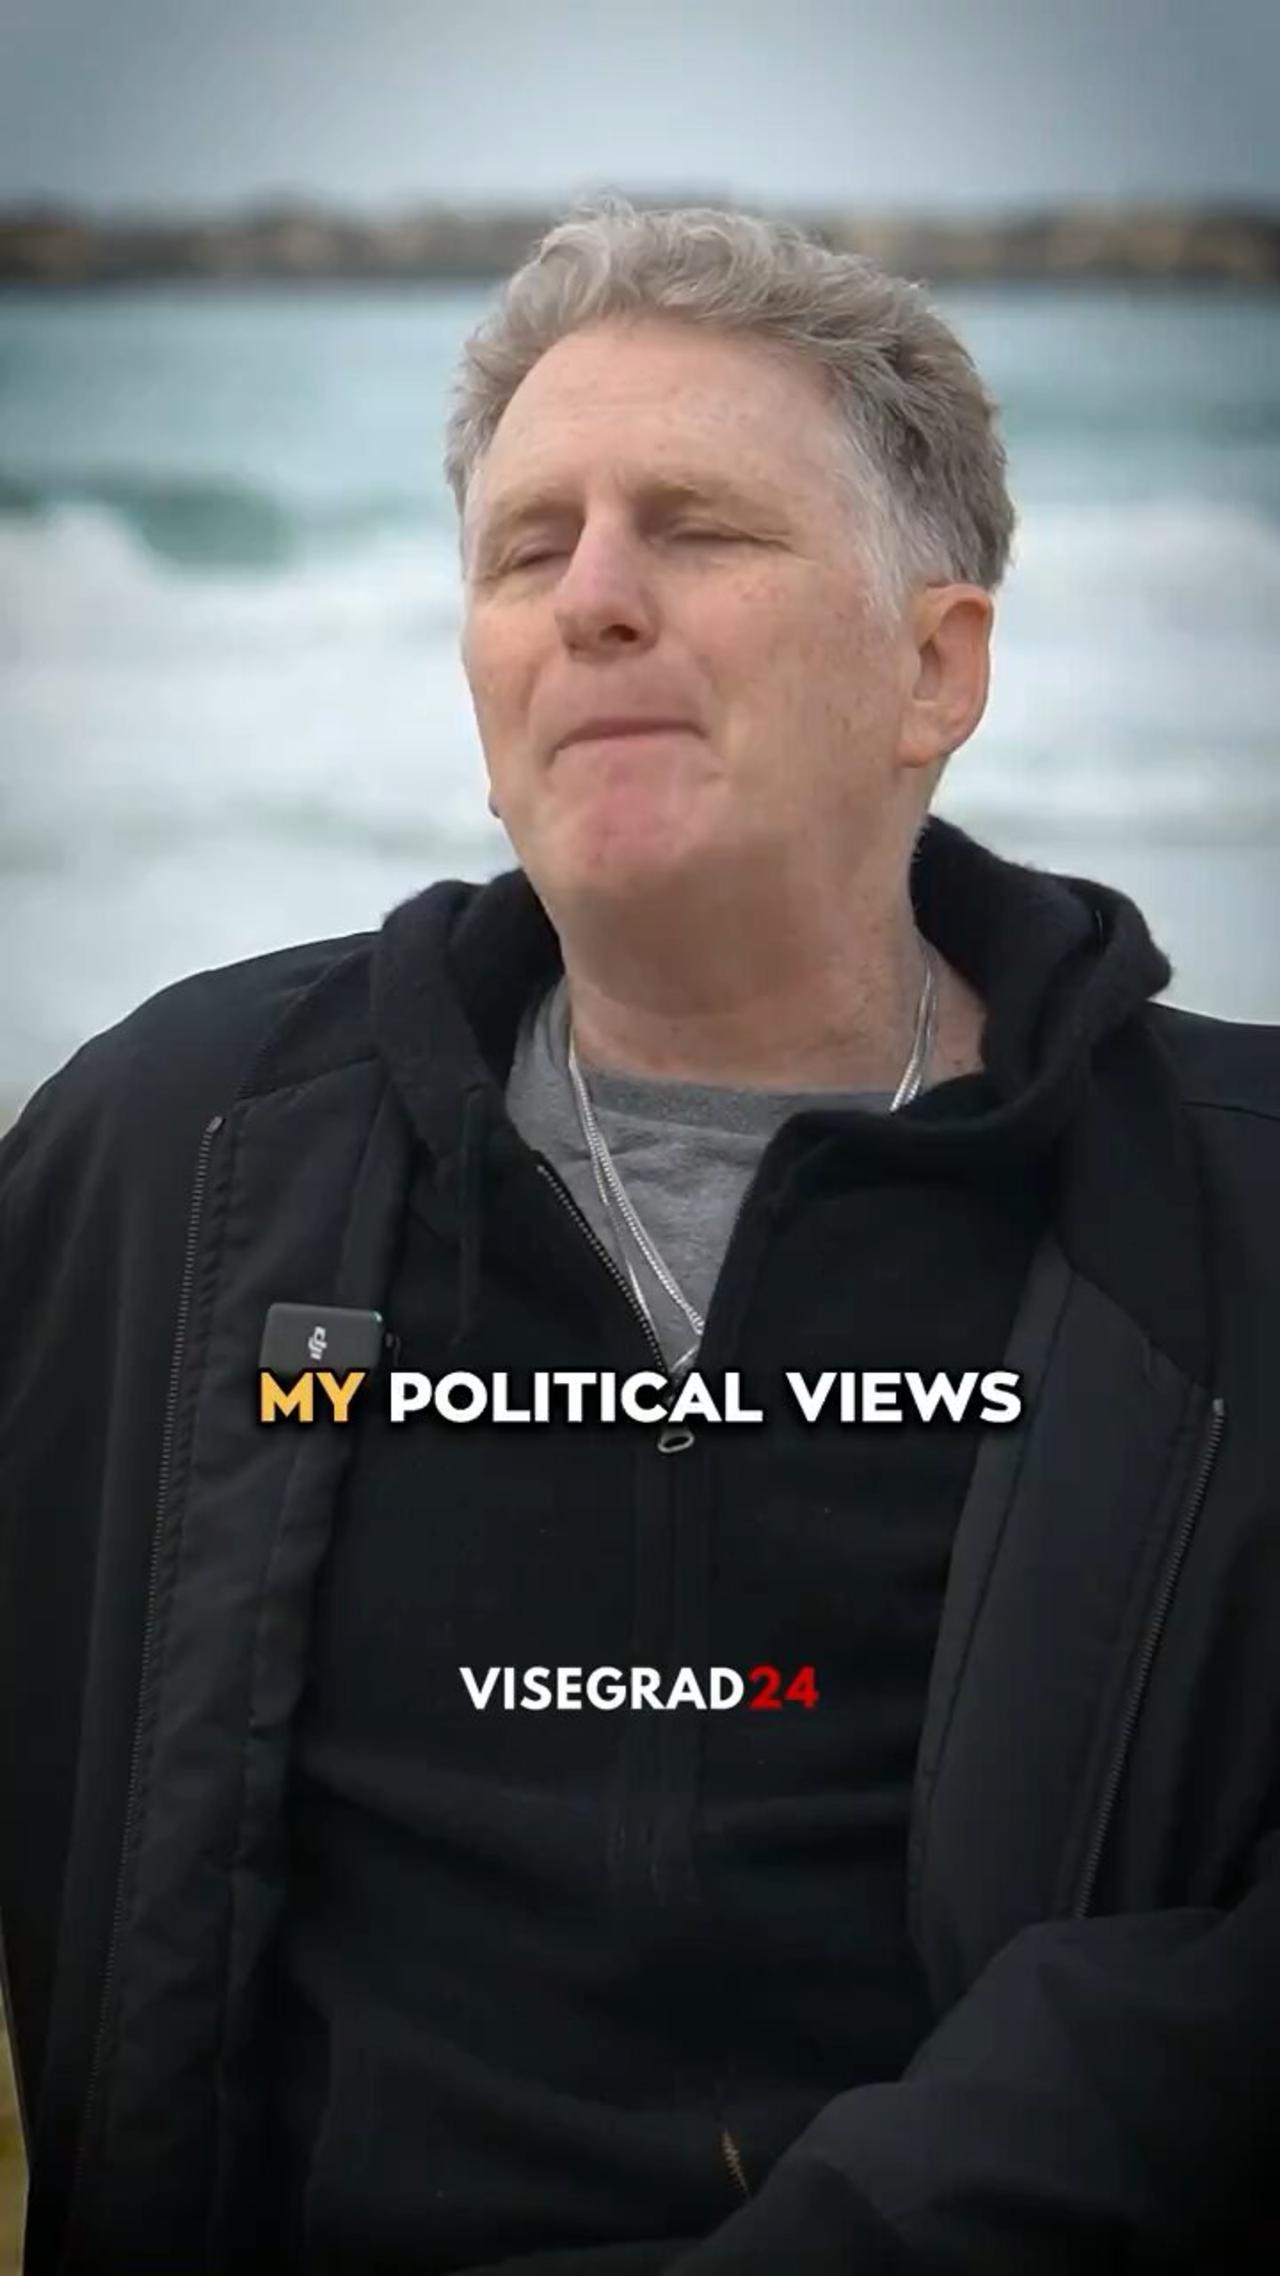 Michael Rapaport declares voting for Trump is on the table, will not support Biden in the presidenti